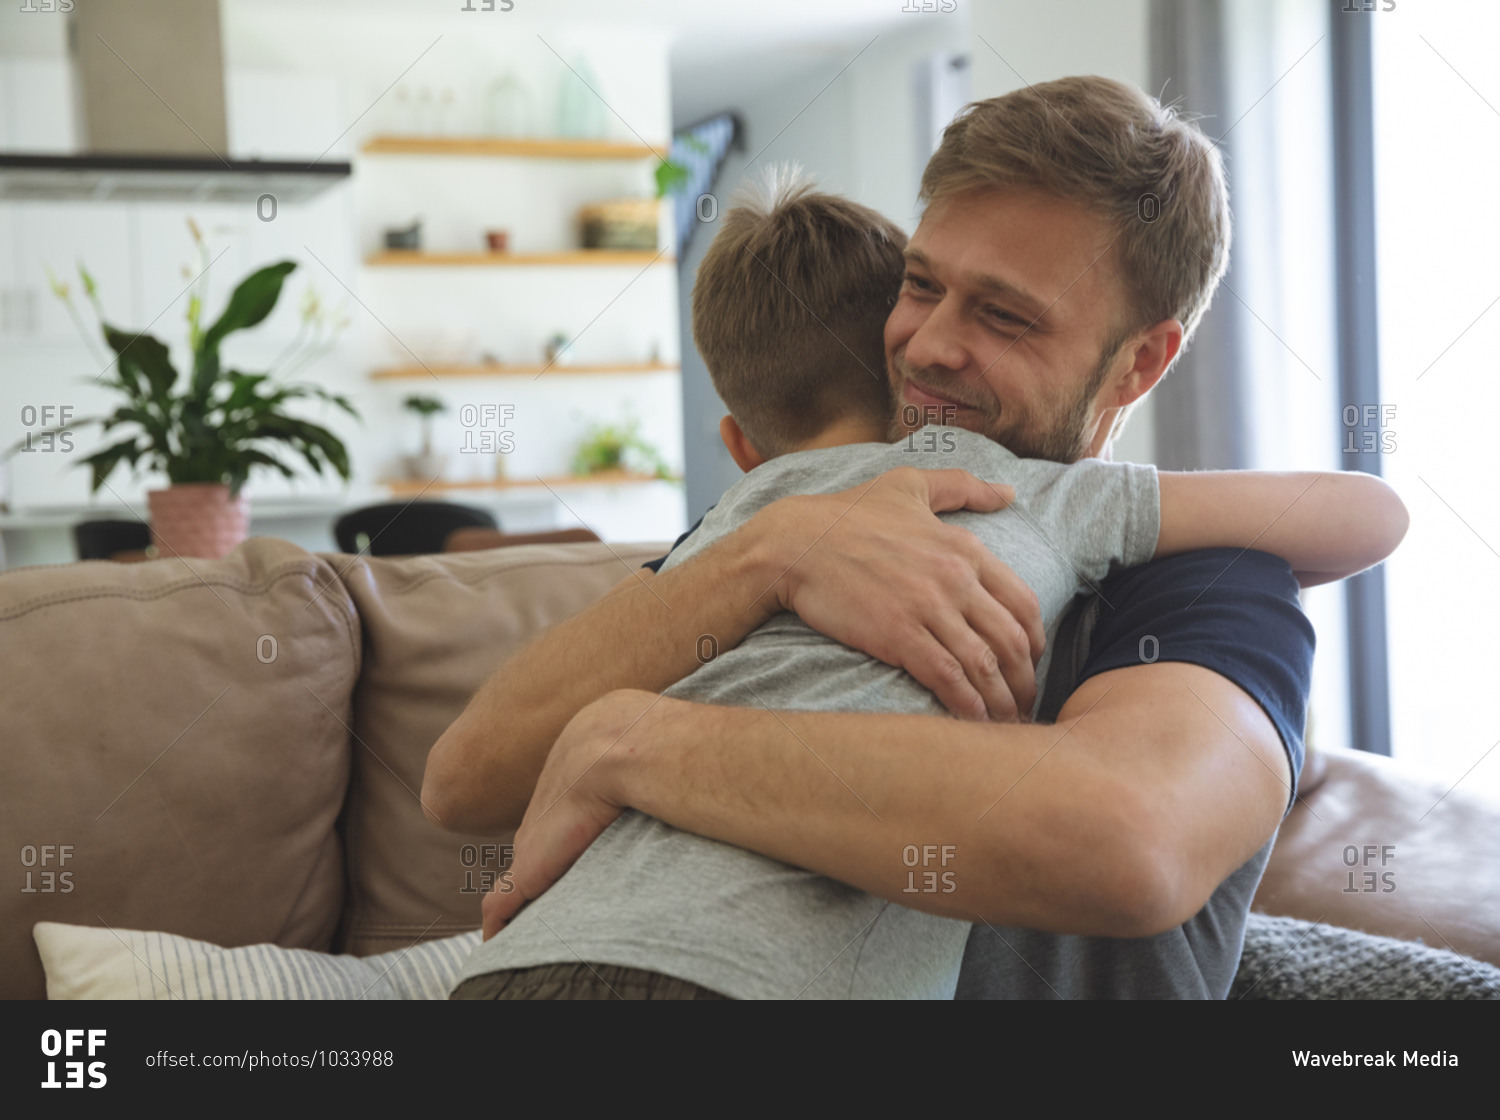 Caucasian man at home with his son together, sitting on sofa in living room, embracing each other, smiling. Social distancing during Covid 19 Coronavirus quarantine lockdown.